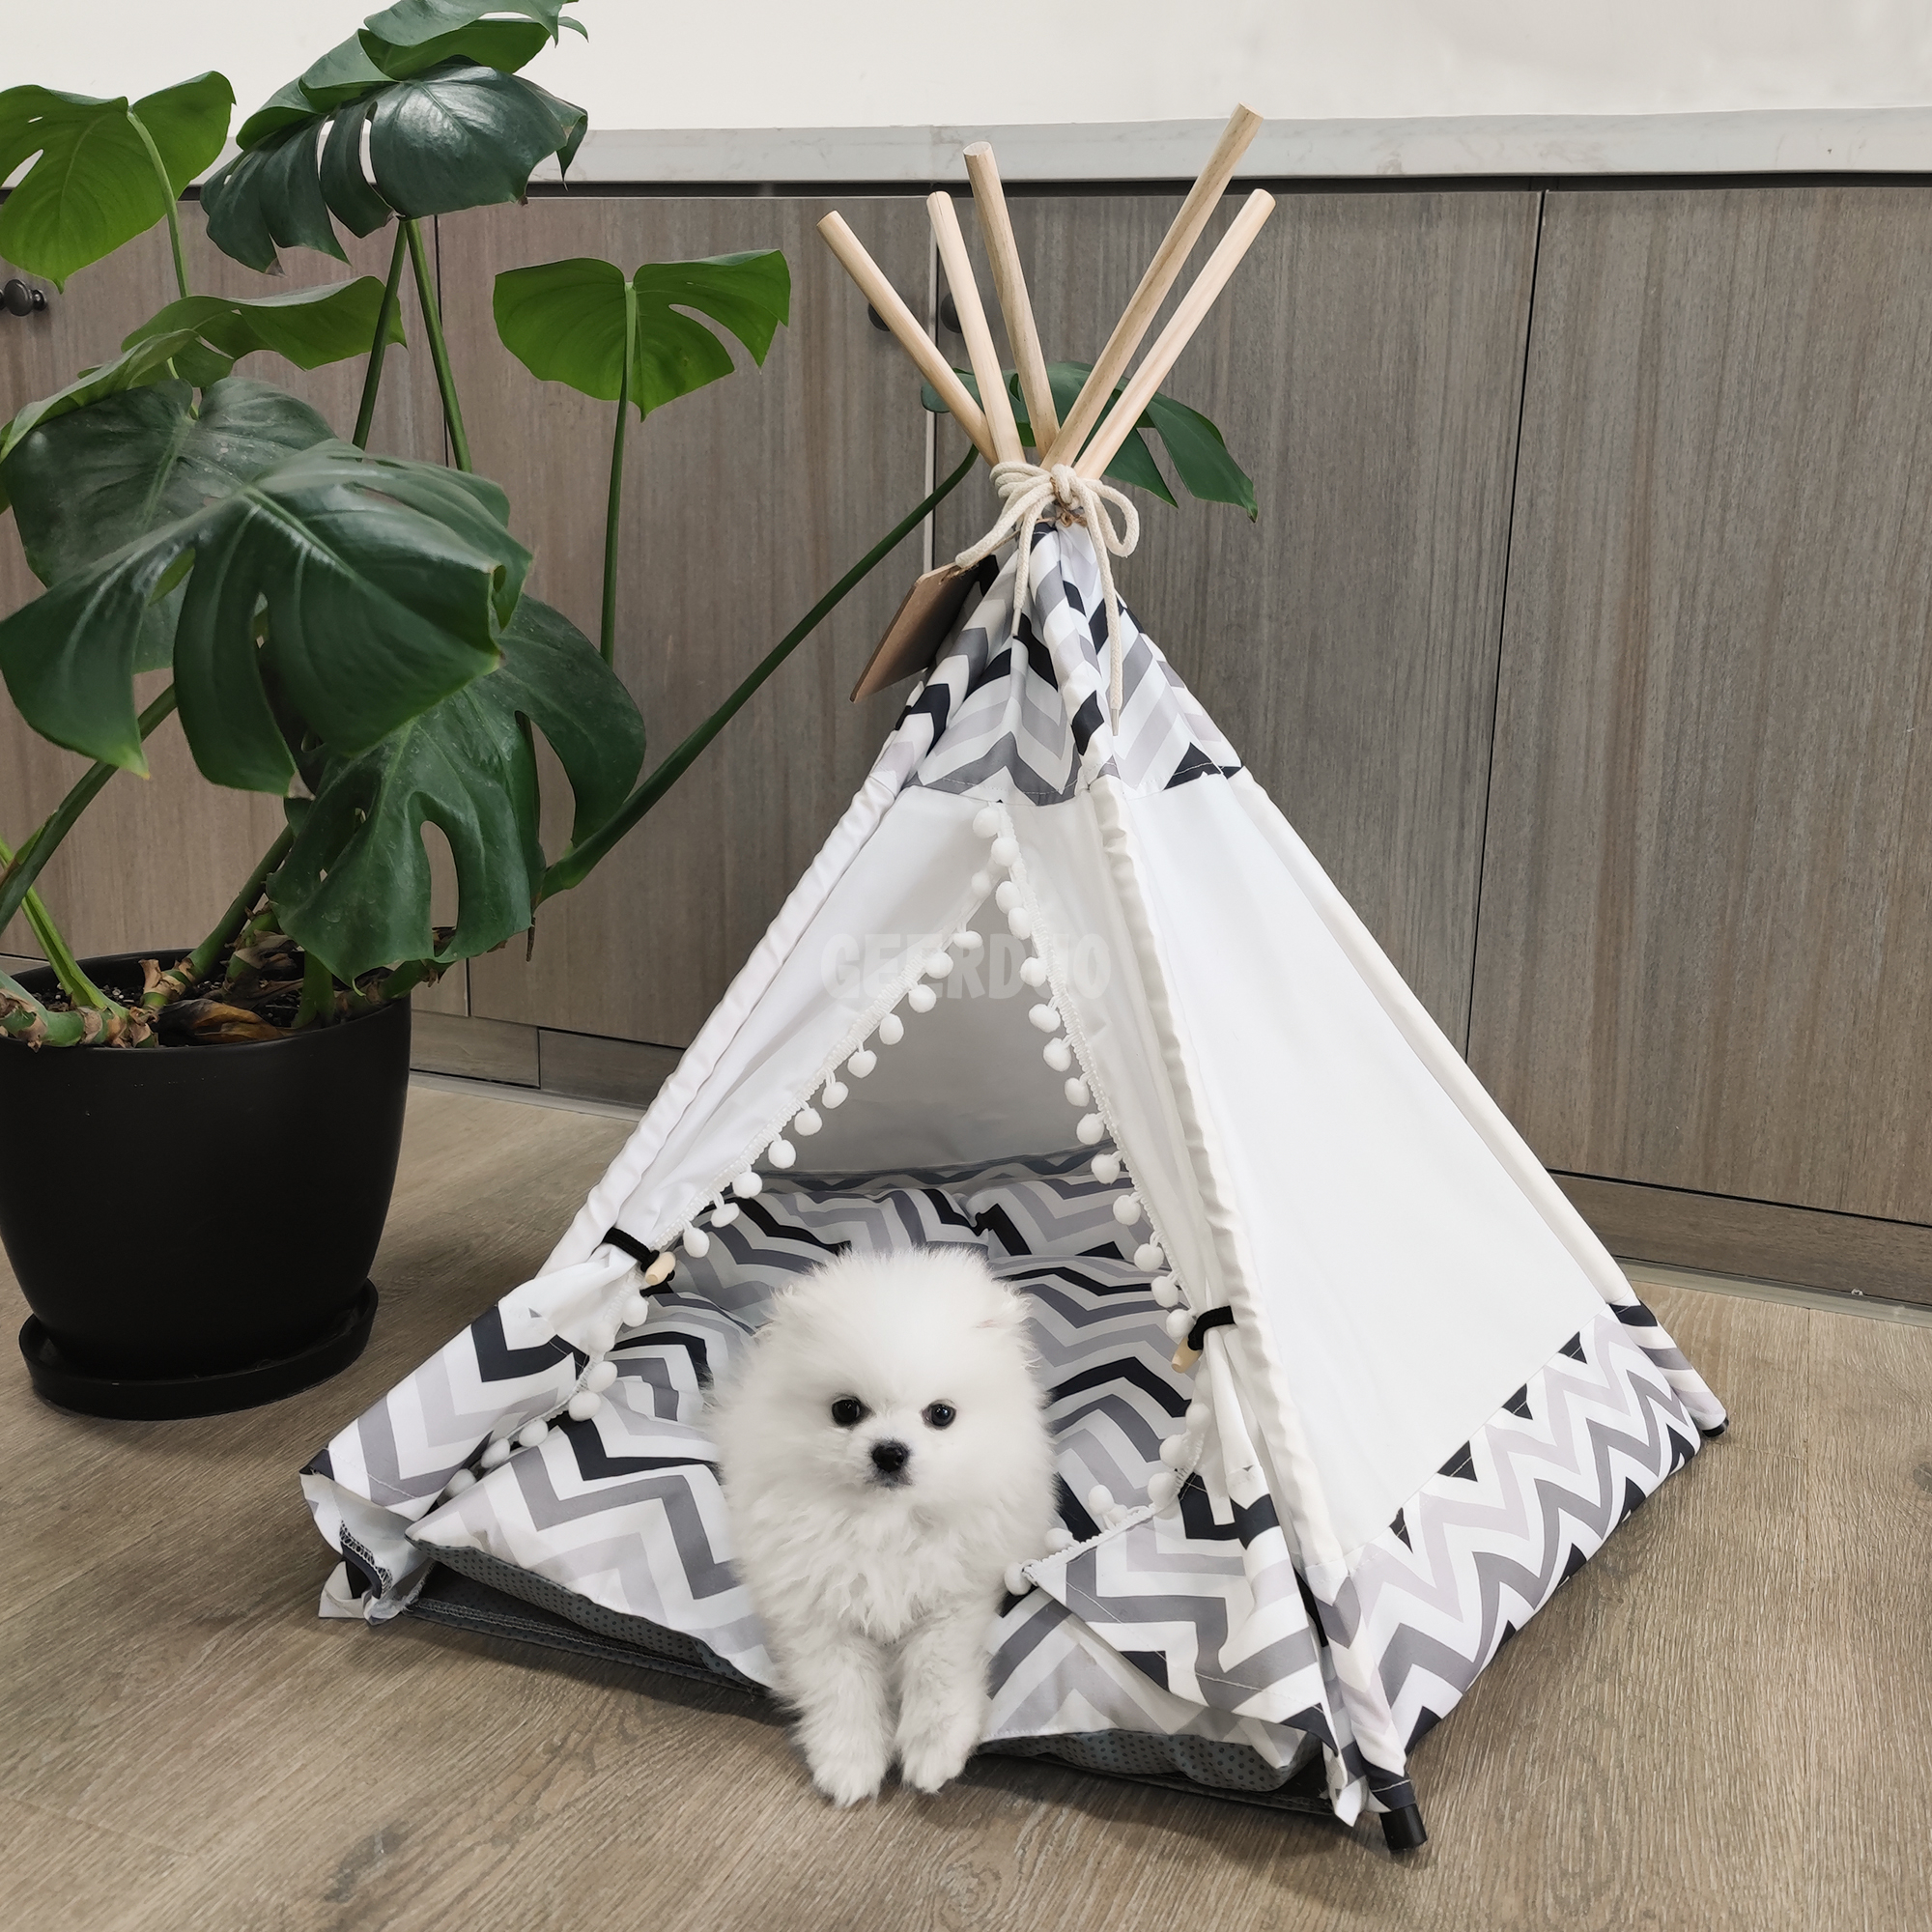 Portable Pet Teepee for Small Pets with Cushions GRDTE-6